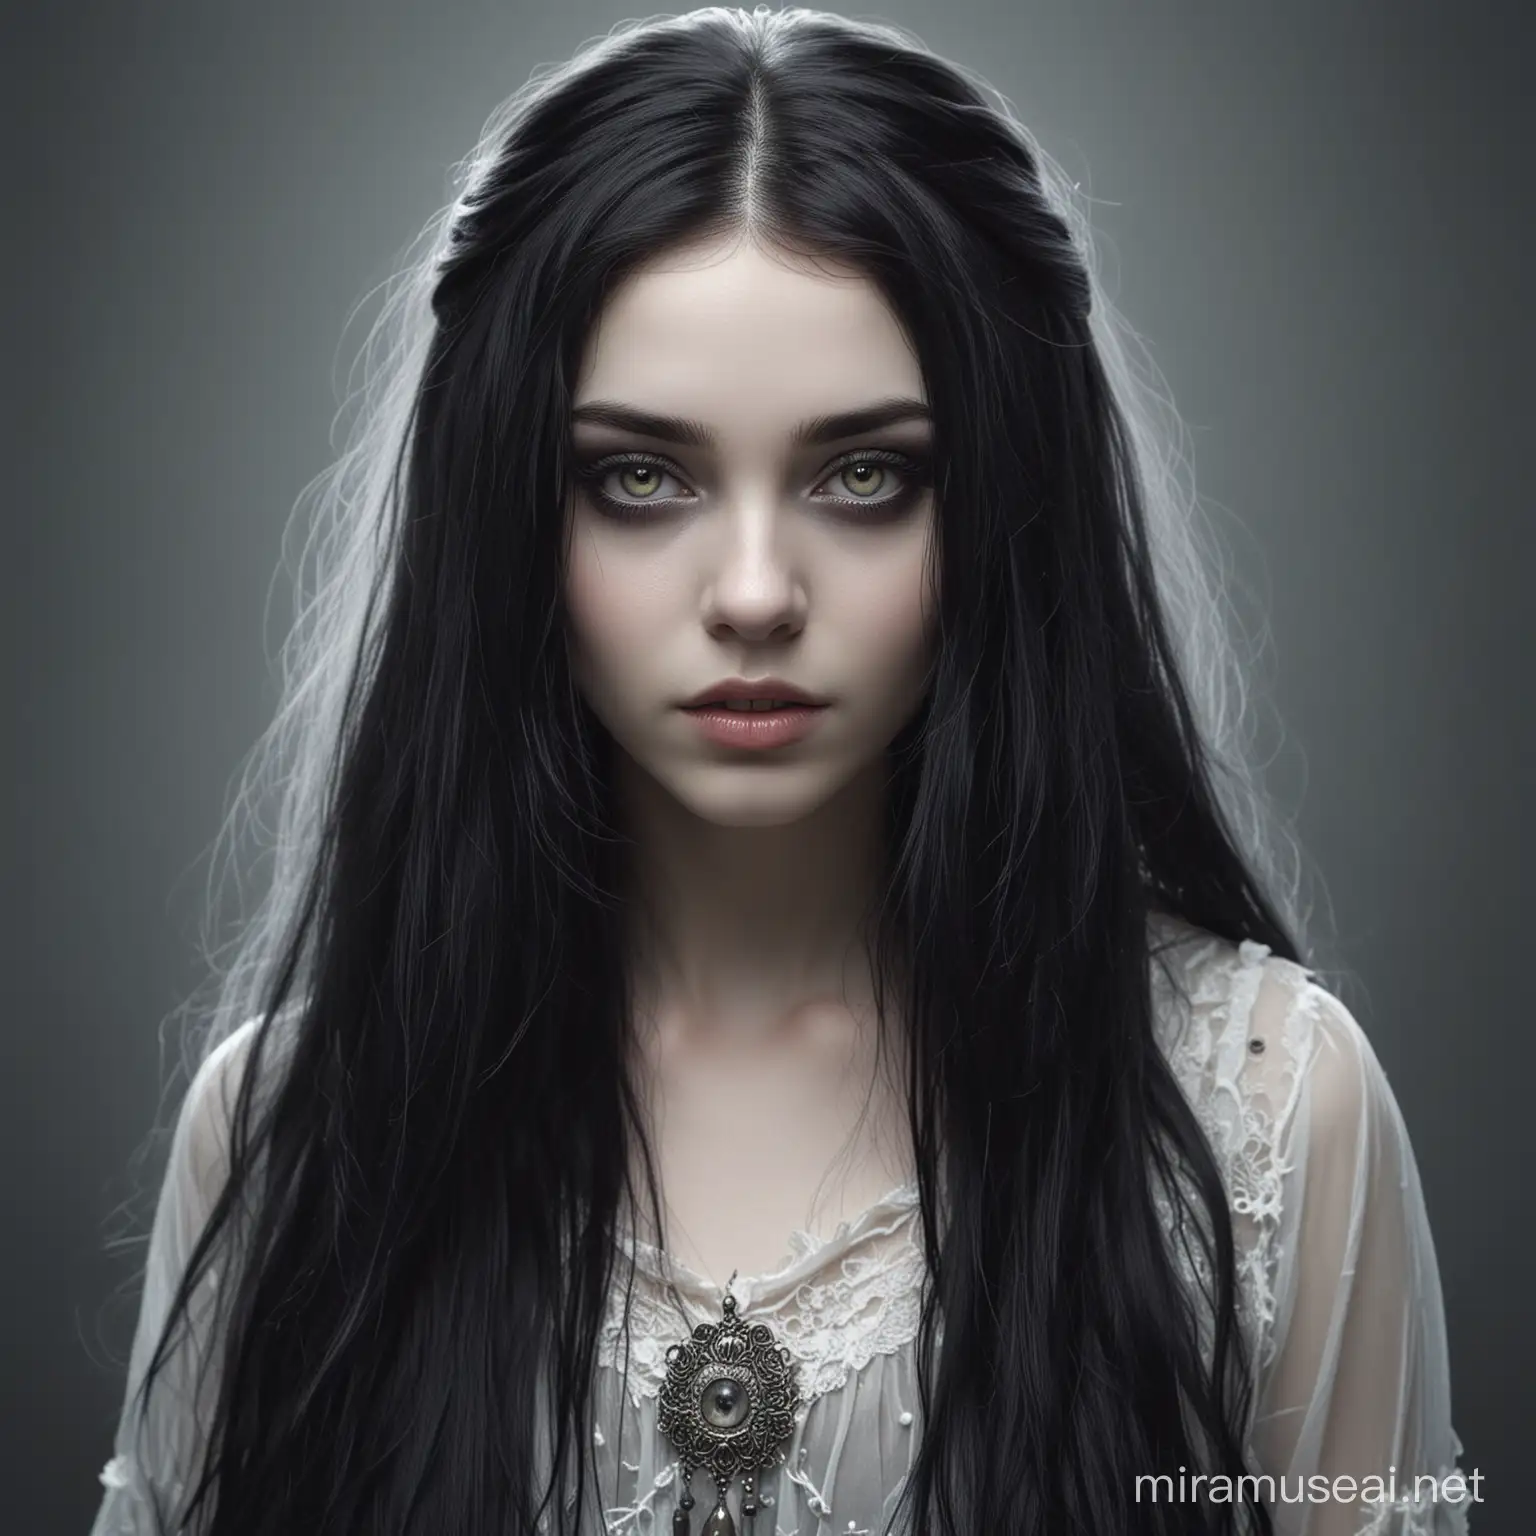 Ethereal Undead Teenage Woman with Enigmatic Silver Eyes